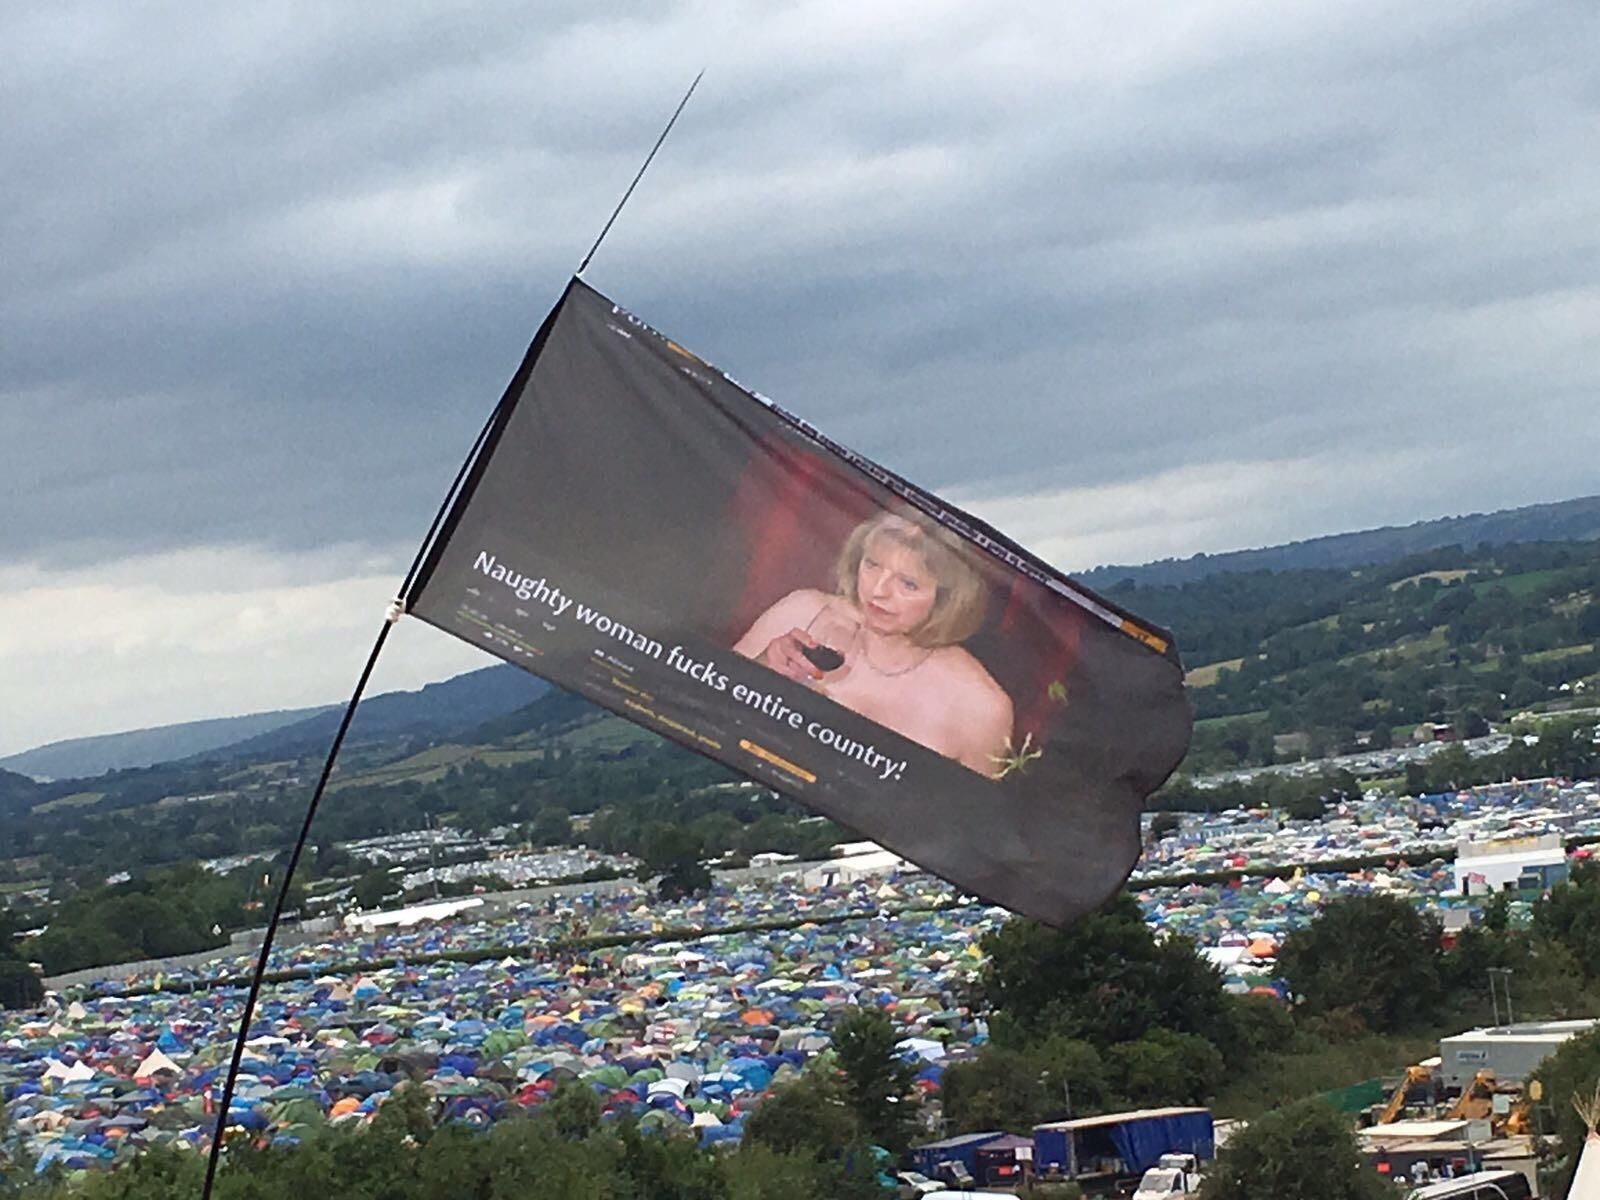 These Glastonbury flags are hilarious